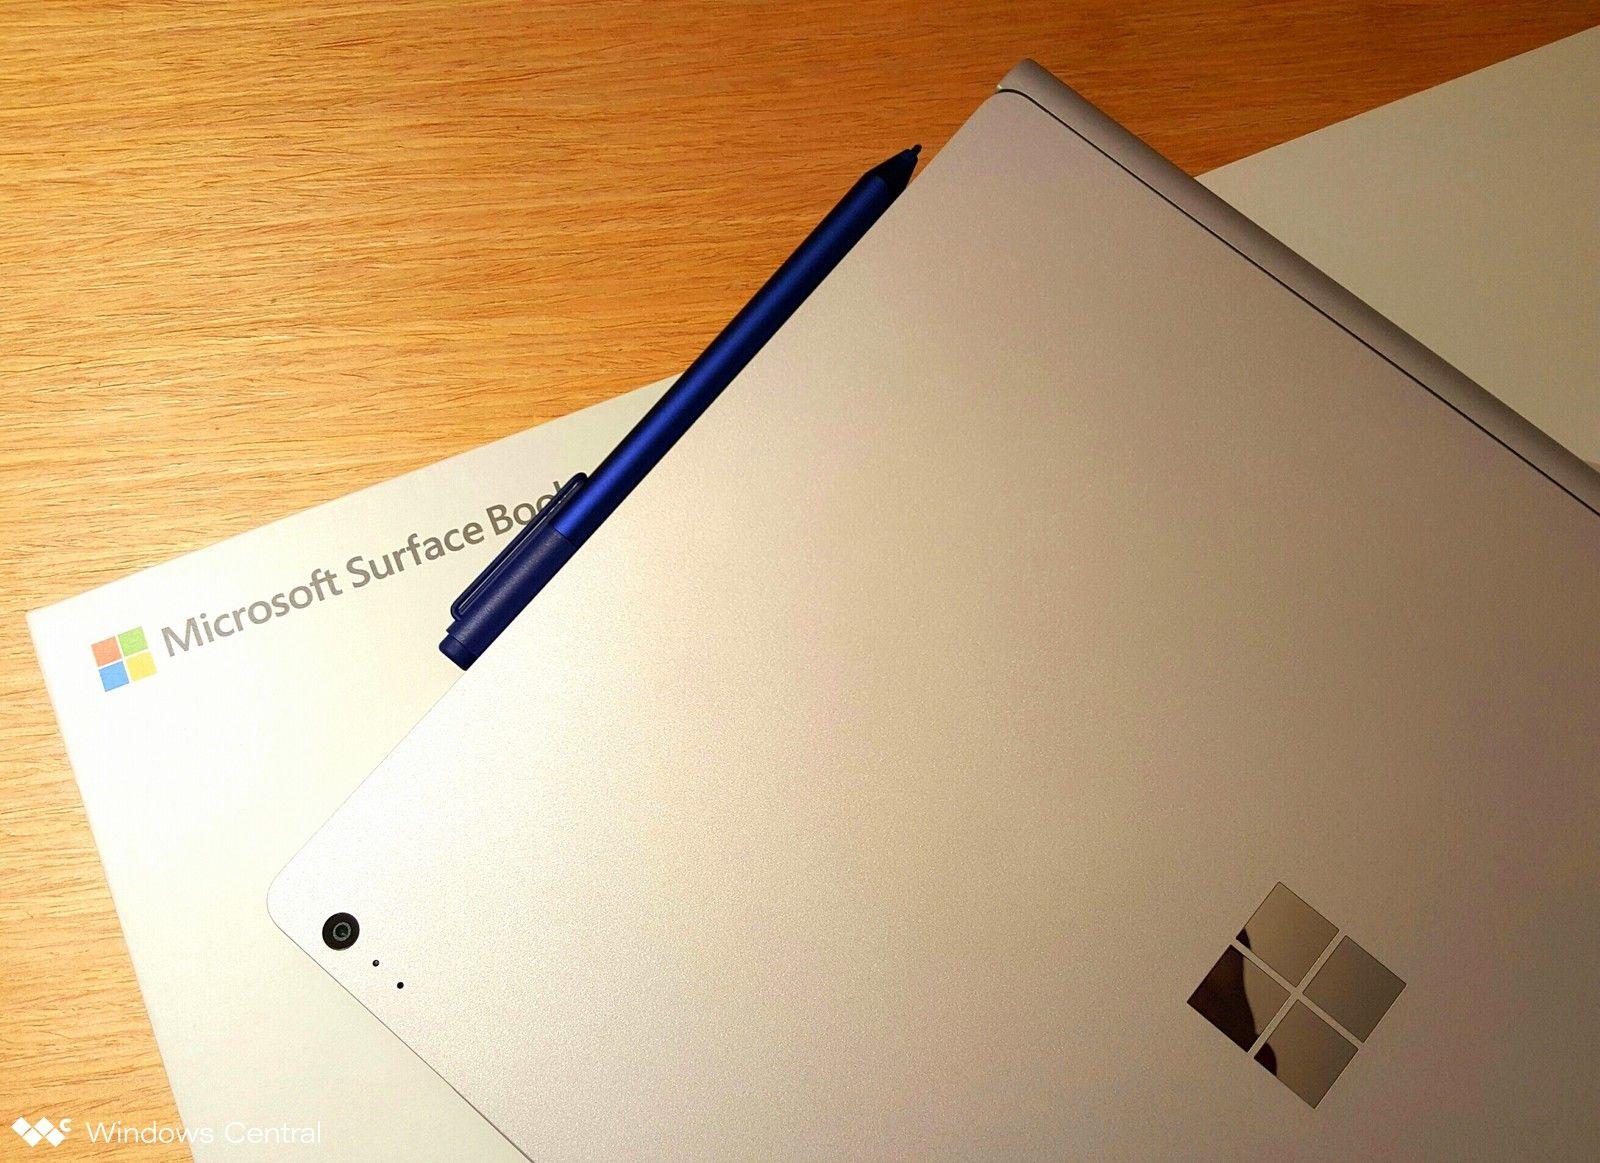 Microsoft Surface 4 Logo - Surface Pro 4 and Surface Book user guides and recovery image ...